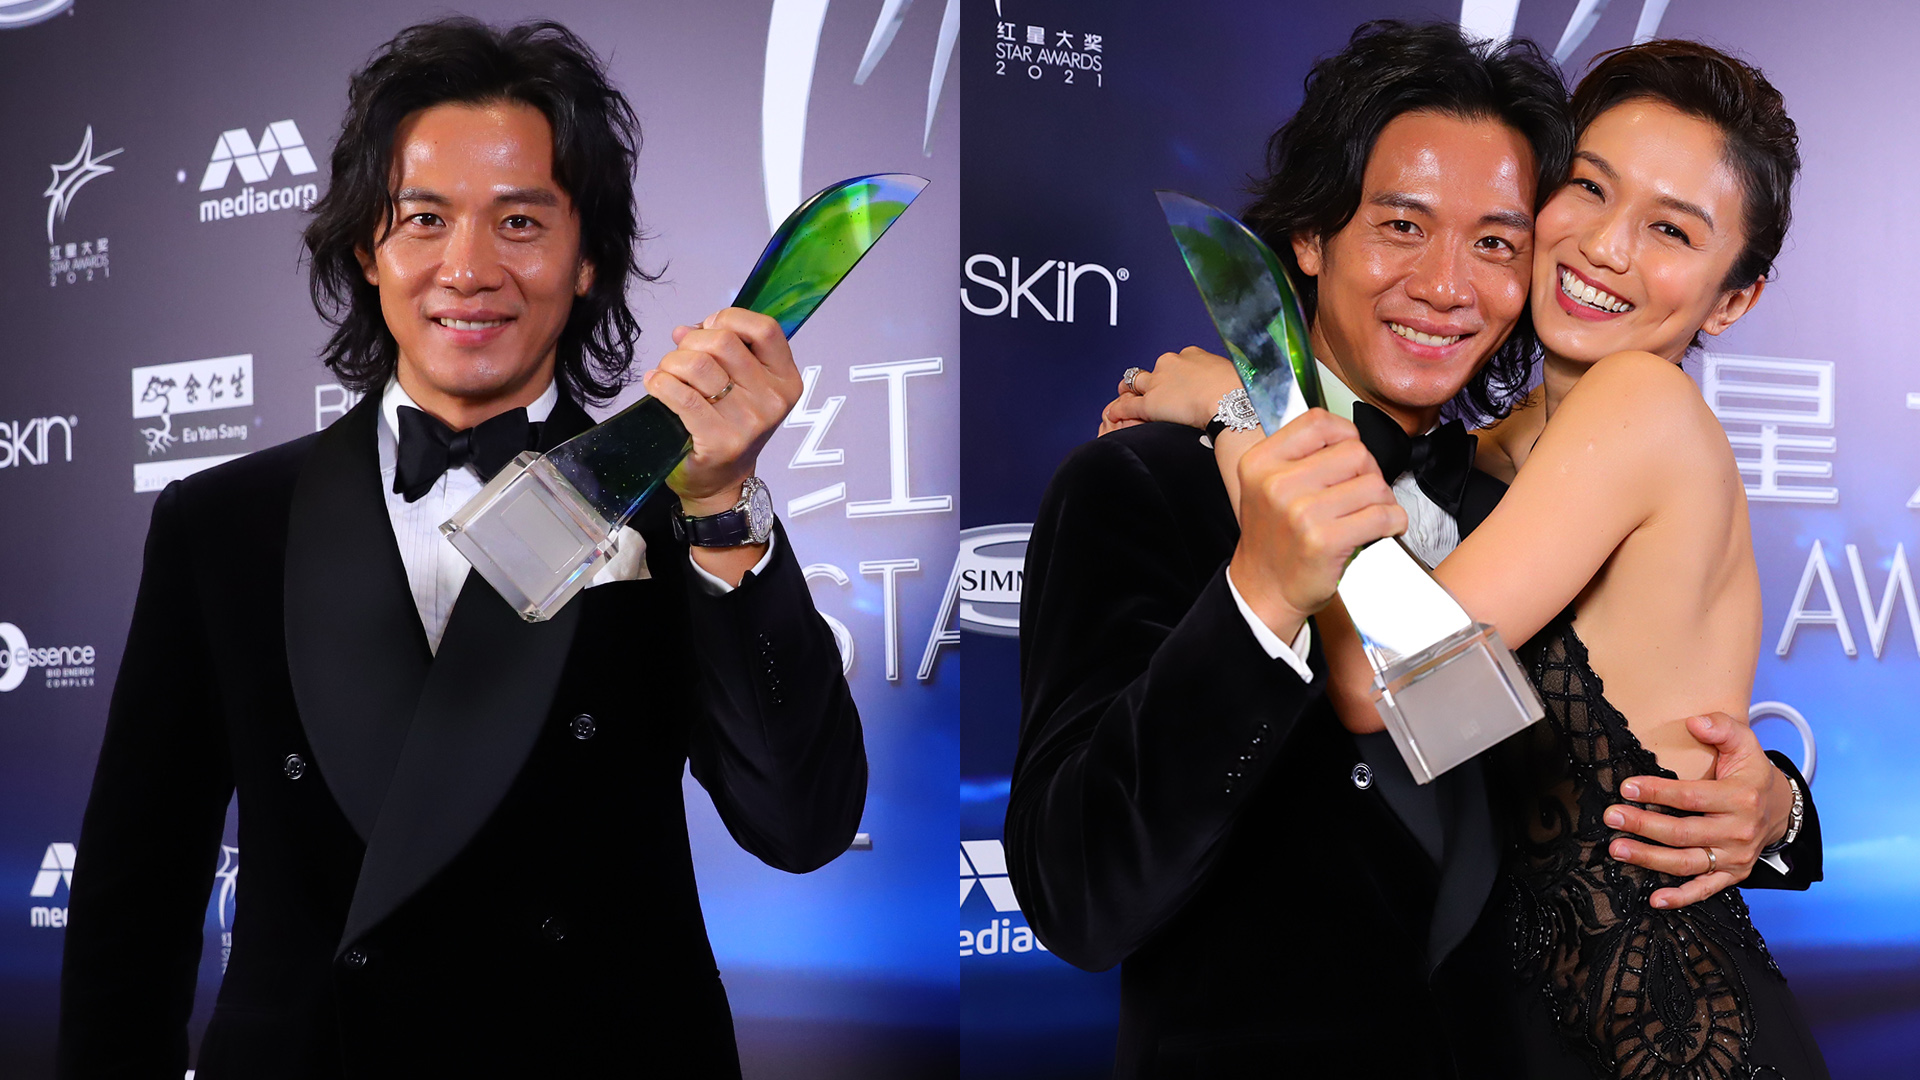 Qi Yuwu Won’t Display His Star Awards Best Actor Trophy ‘Cos He Wants ...